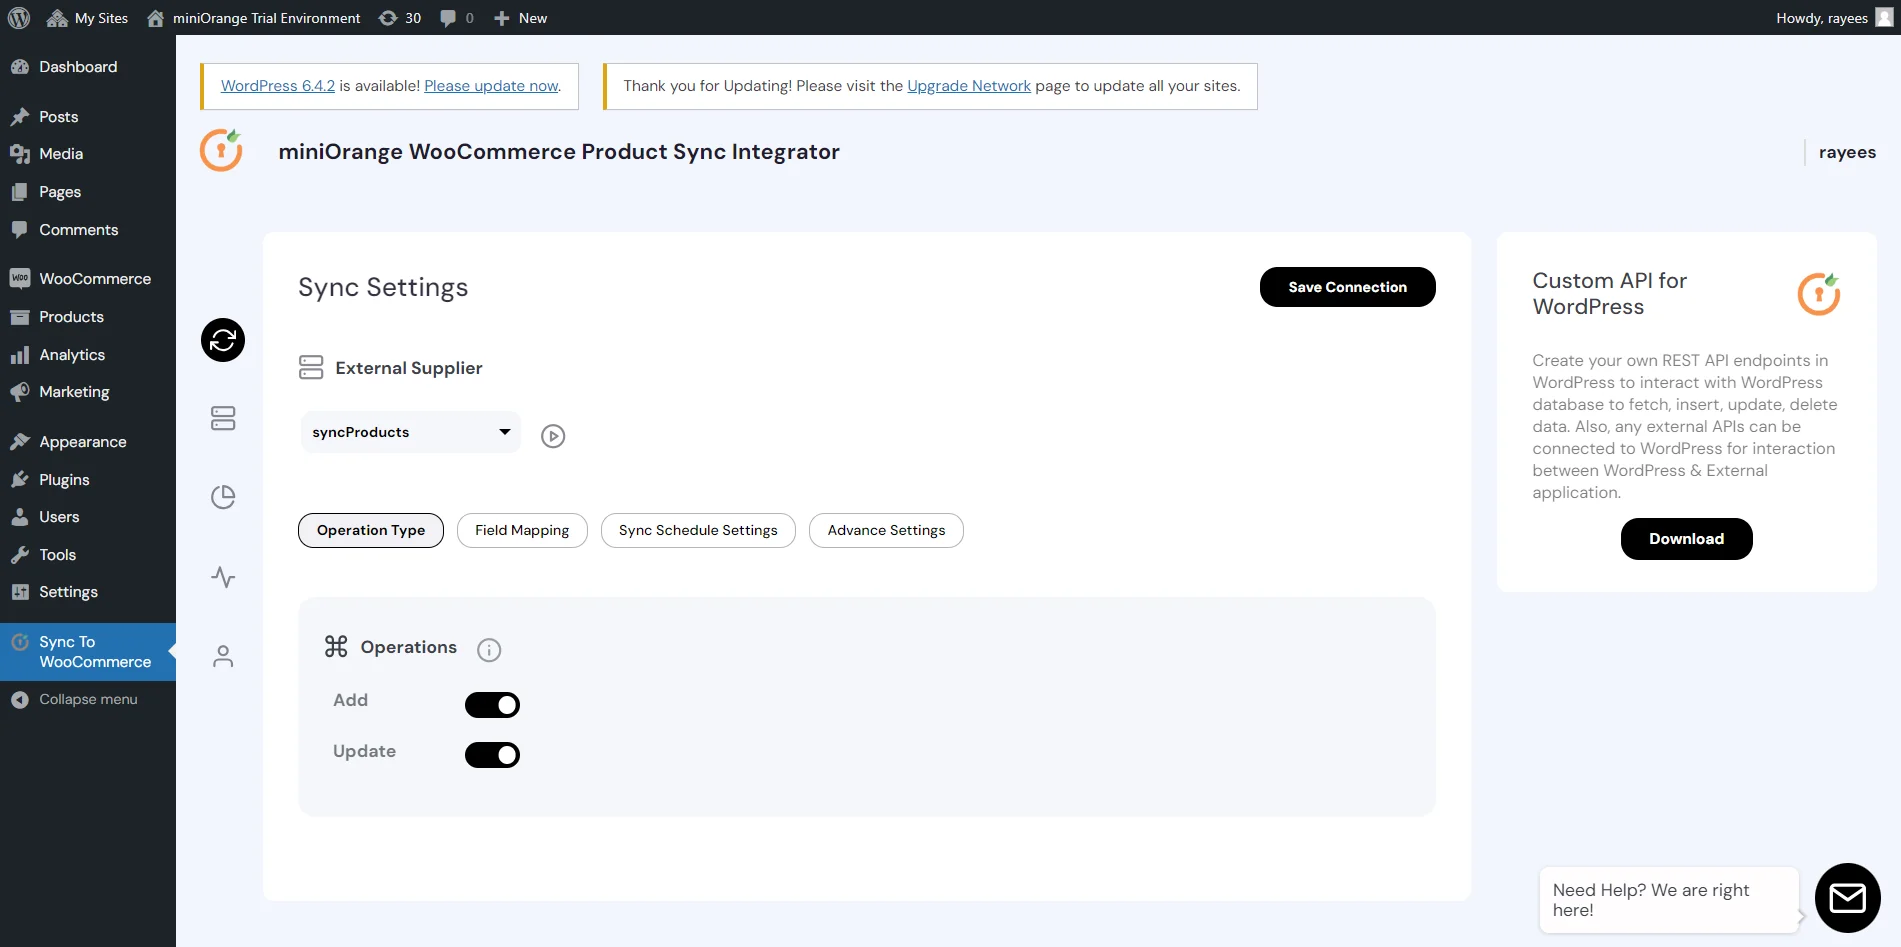 Configure WooCommerce Product Sync - Sync settings operation type